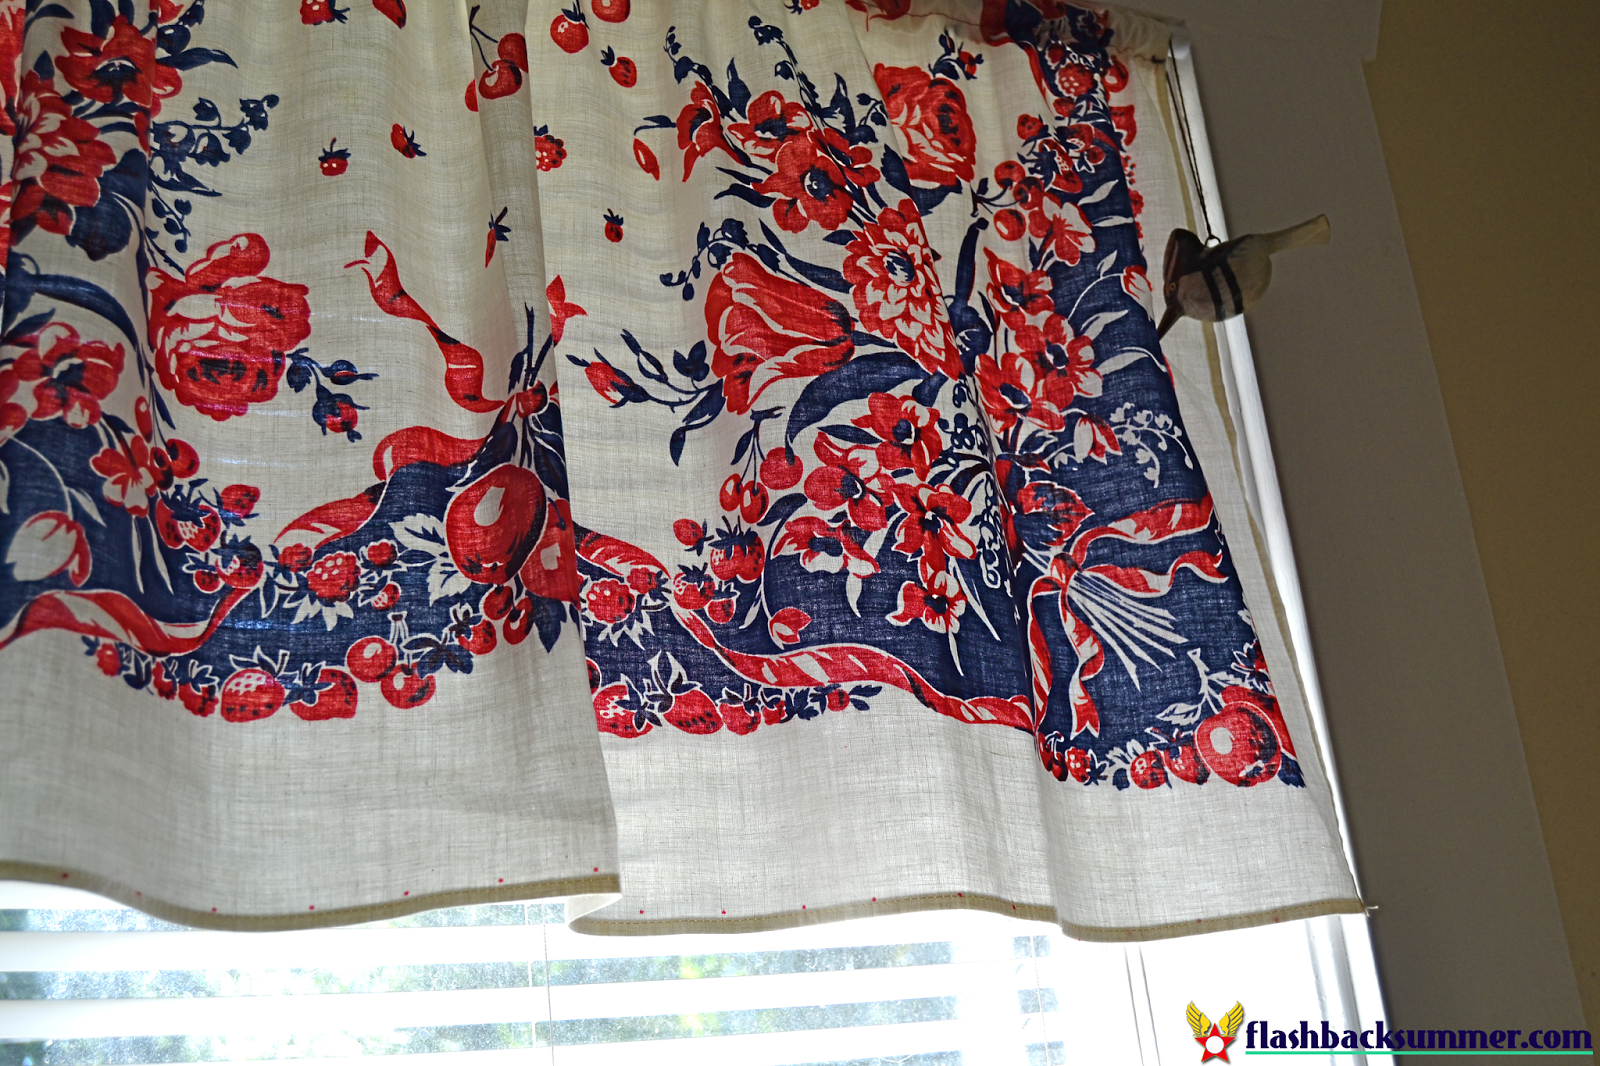 Flashback Summer: My Not-a-Magazine-Shoot Living Room - repurposed vintage table cloth